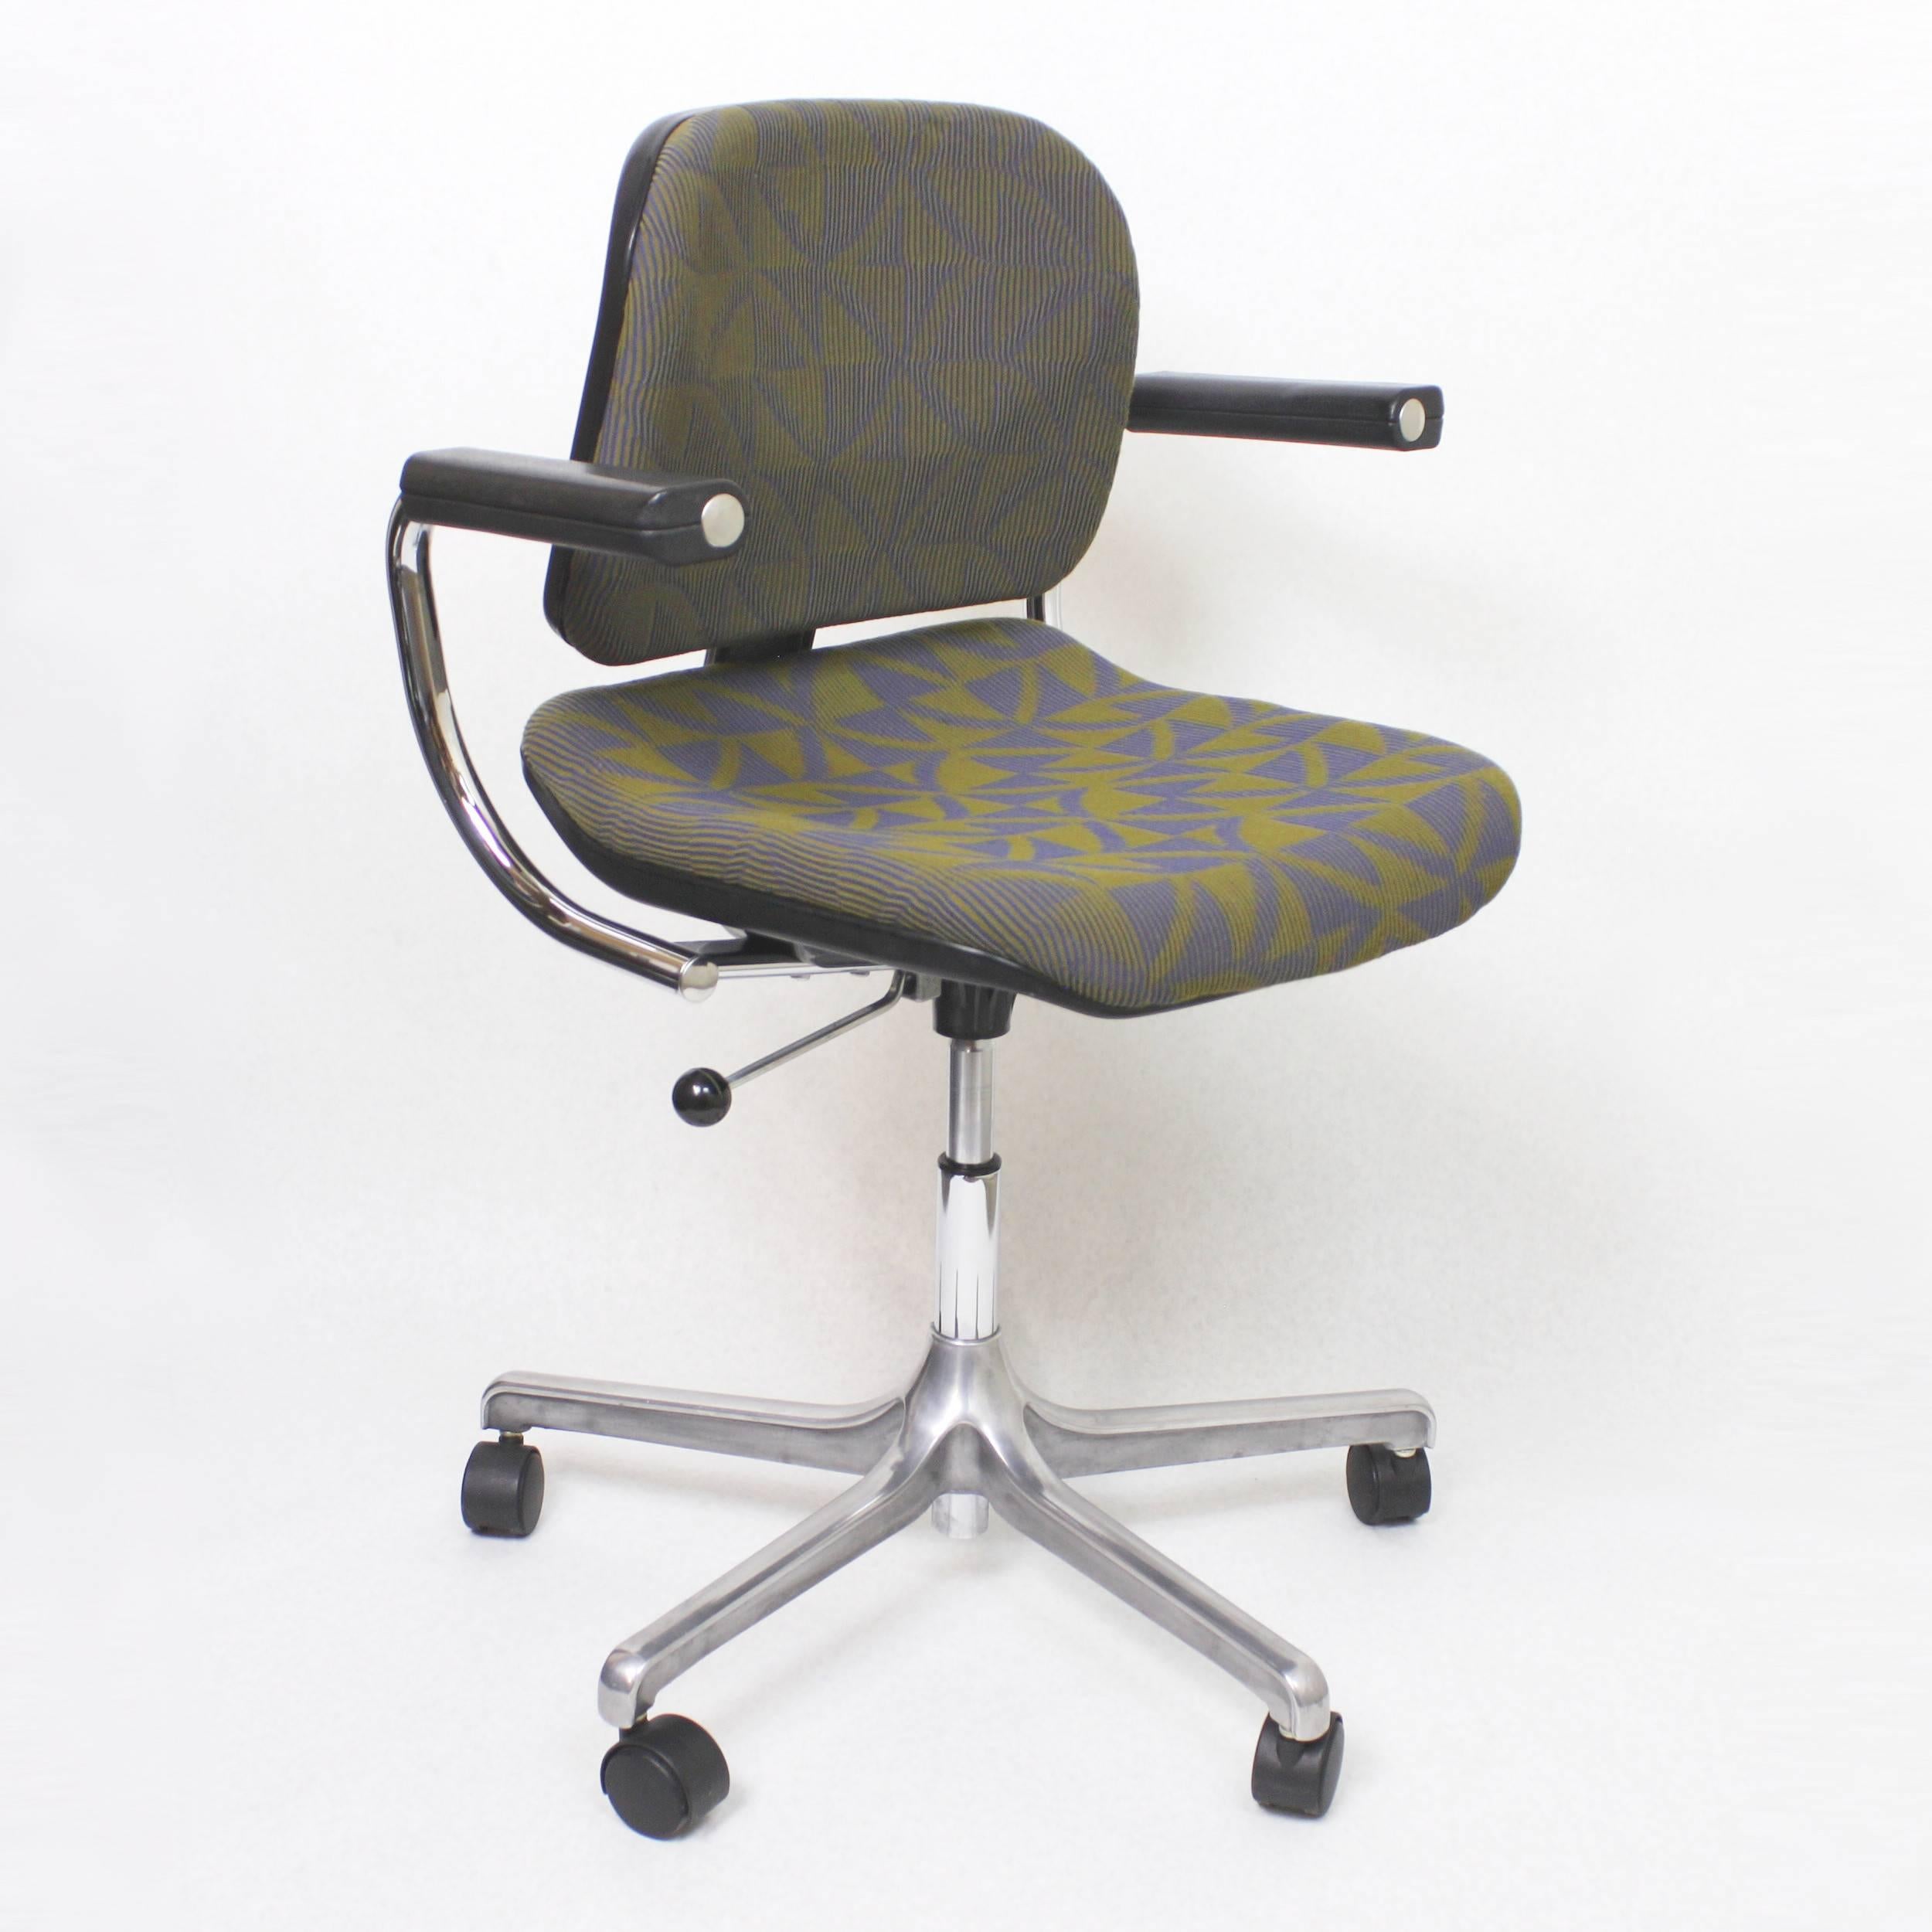 This is a fantastic example of Fritz Makiol's iconic Model 5600 EuroChair. Originally manufactured in the late 1970s by Girsberger, this chair is fresh off a comprehensive restoration than brings it back to near-new condition (see final photo for